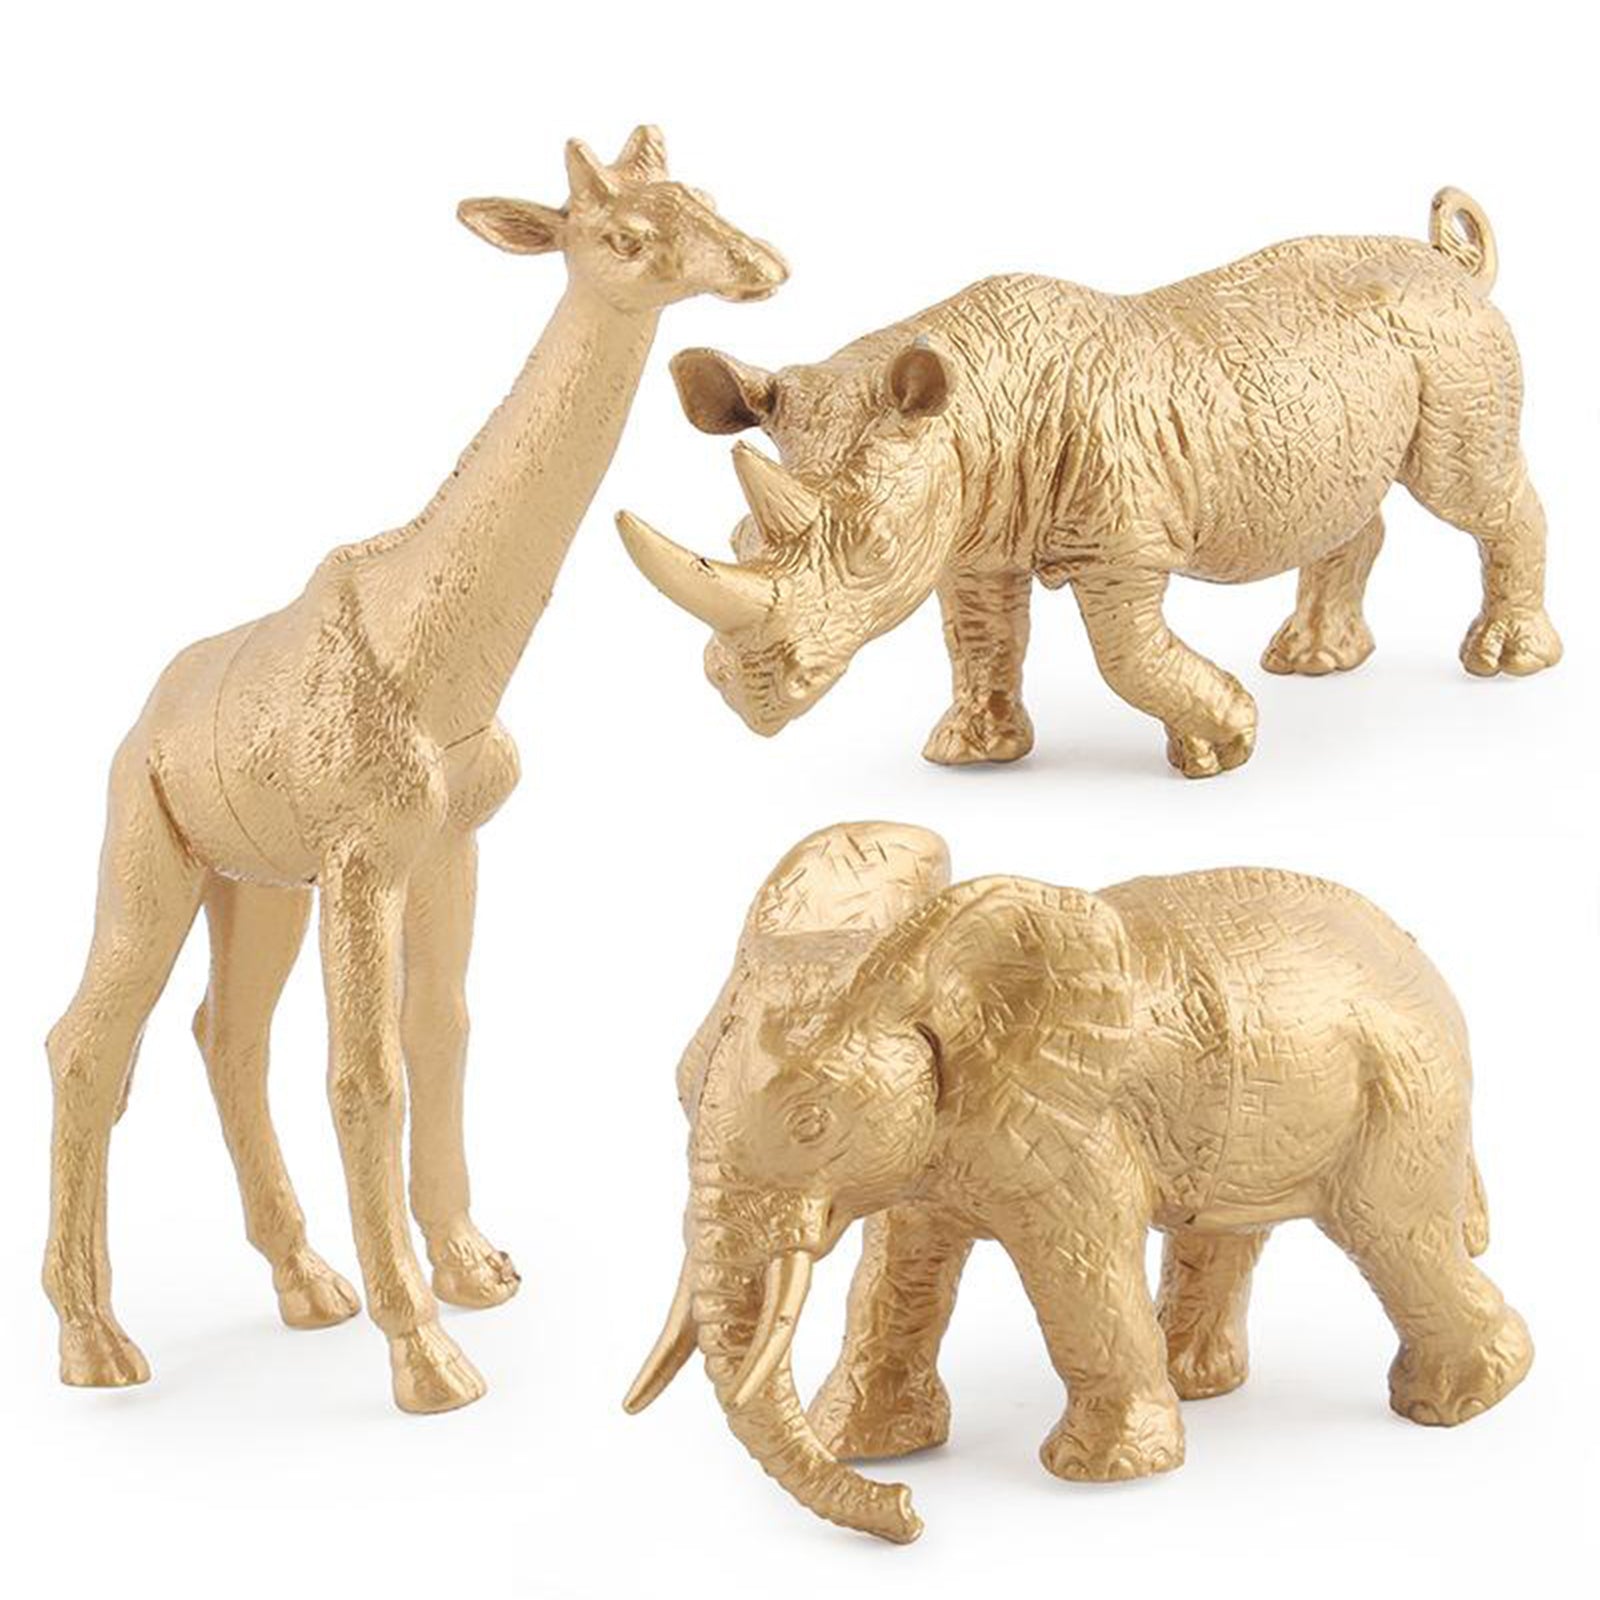 Animal Figures - 7pcs Realistic Golden Action Model Educational Forest Toys